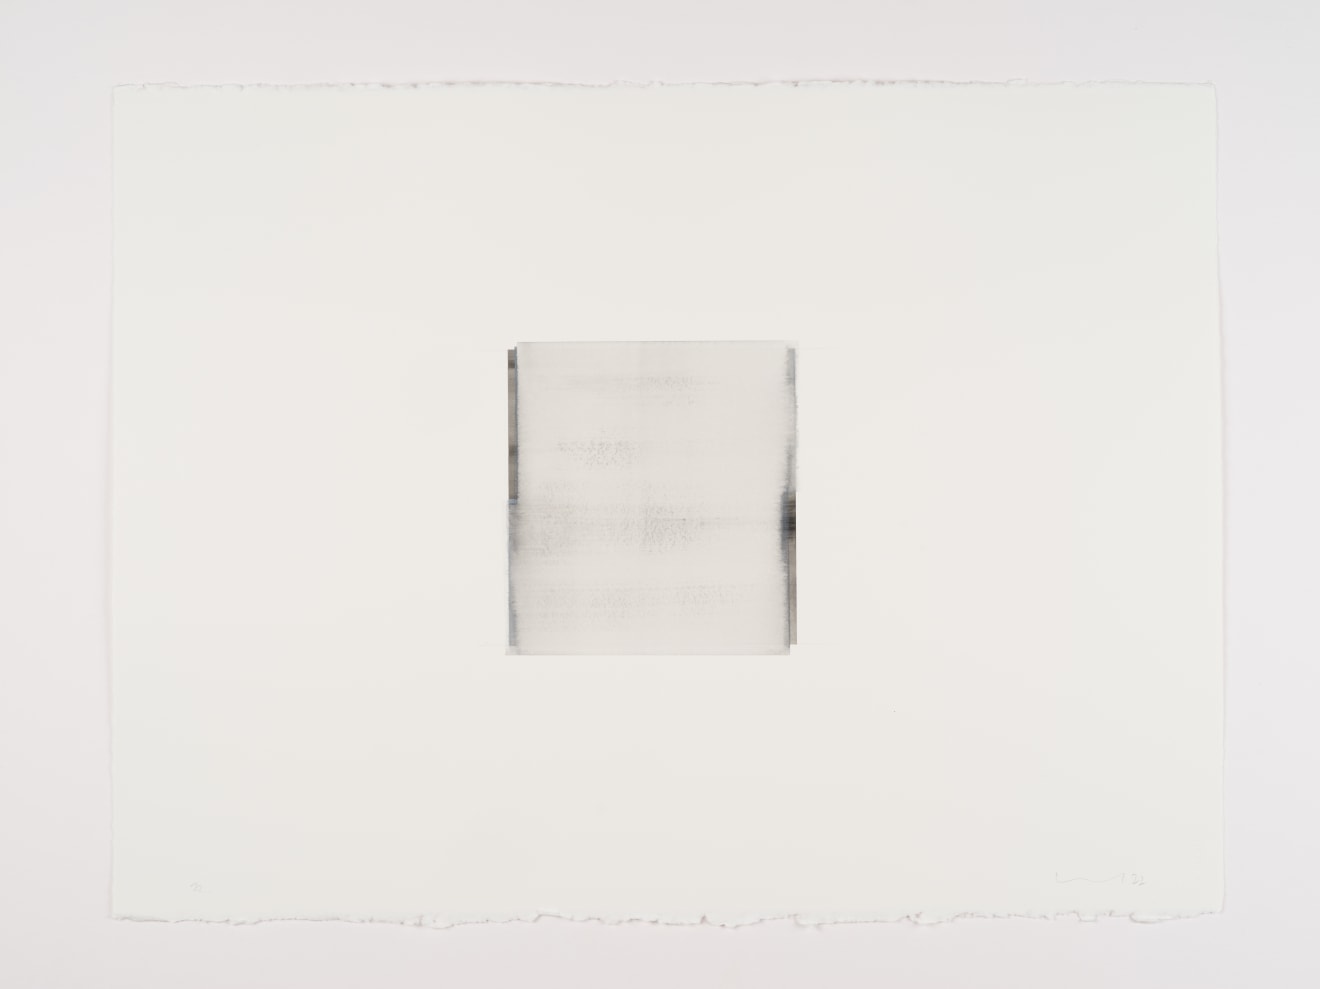 Callum Innes Charcoal Black / Titanium White, 2022 numbered, signed and dated by the artist, recto watercolor on Arches 600gsm HP paper: 22 13/16 x 30 5/16 inches (58 x 77 cm) framed: 25 1/8 x 32 1/8 x 1 3/4 inches (63.8 x 81.6 x 4.4 cm) (CI-22.22.W)